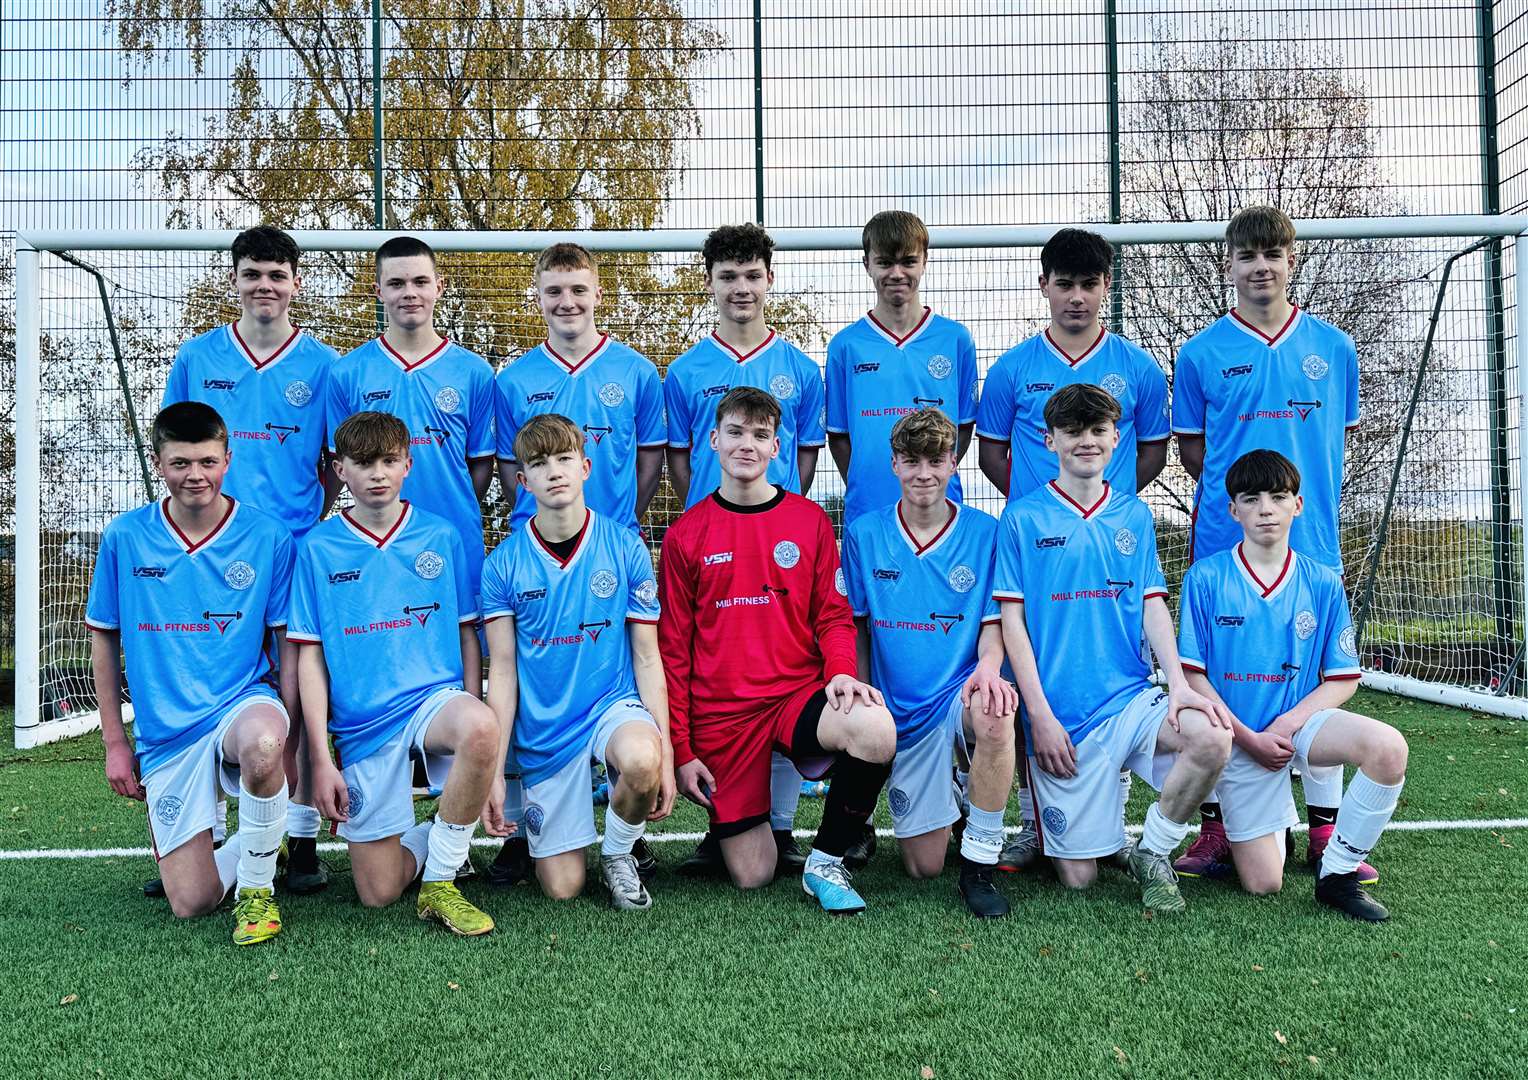 The Caithness United under-16 side who beat their Alness counterparts 6-1 in Easter Ross.